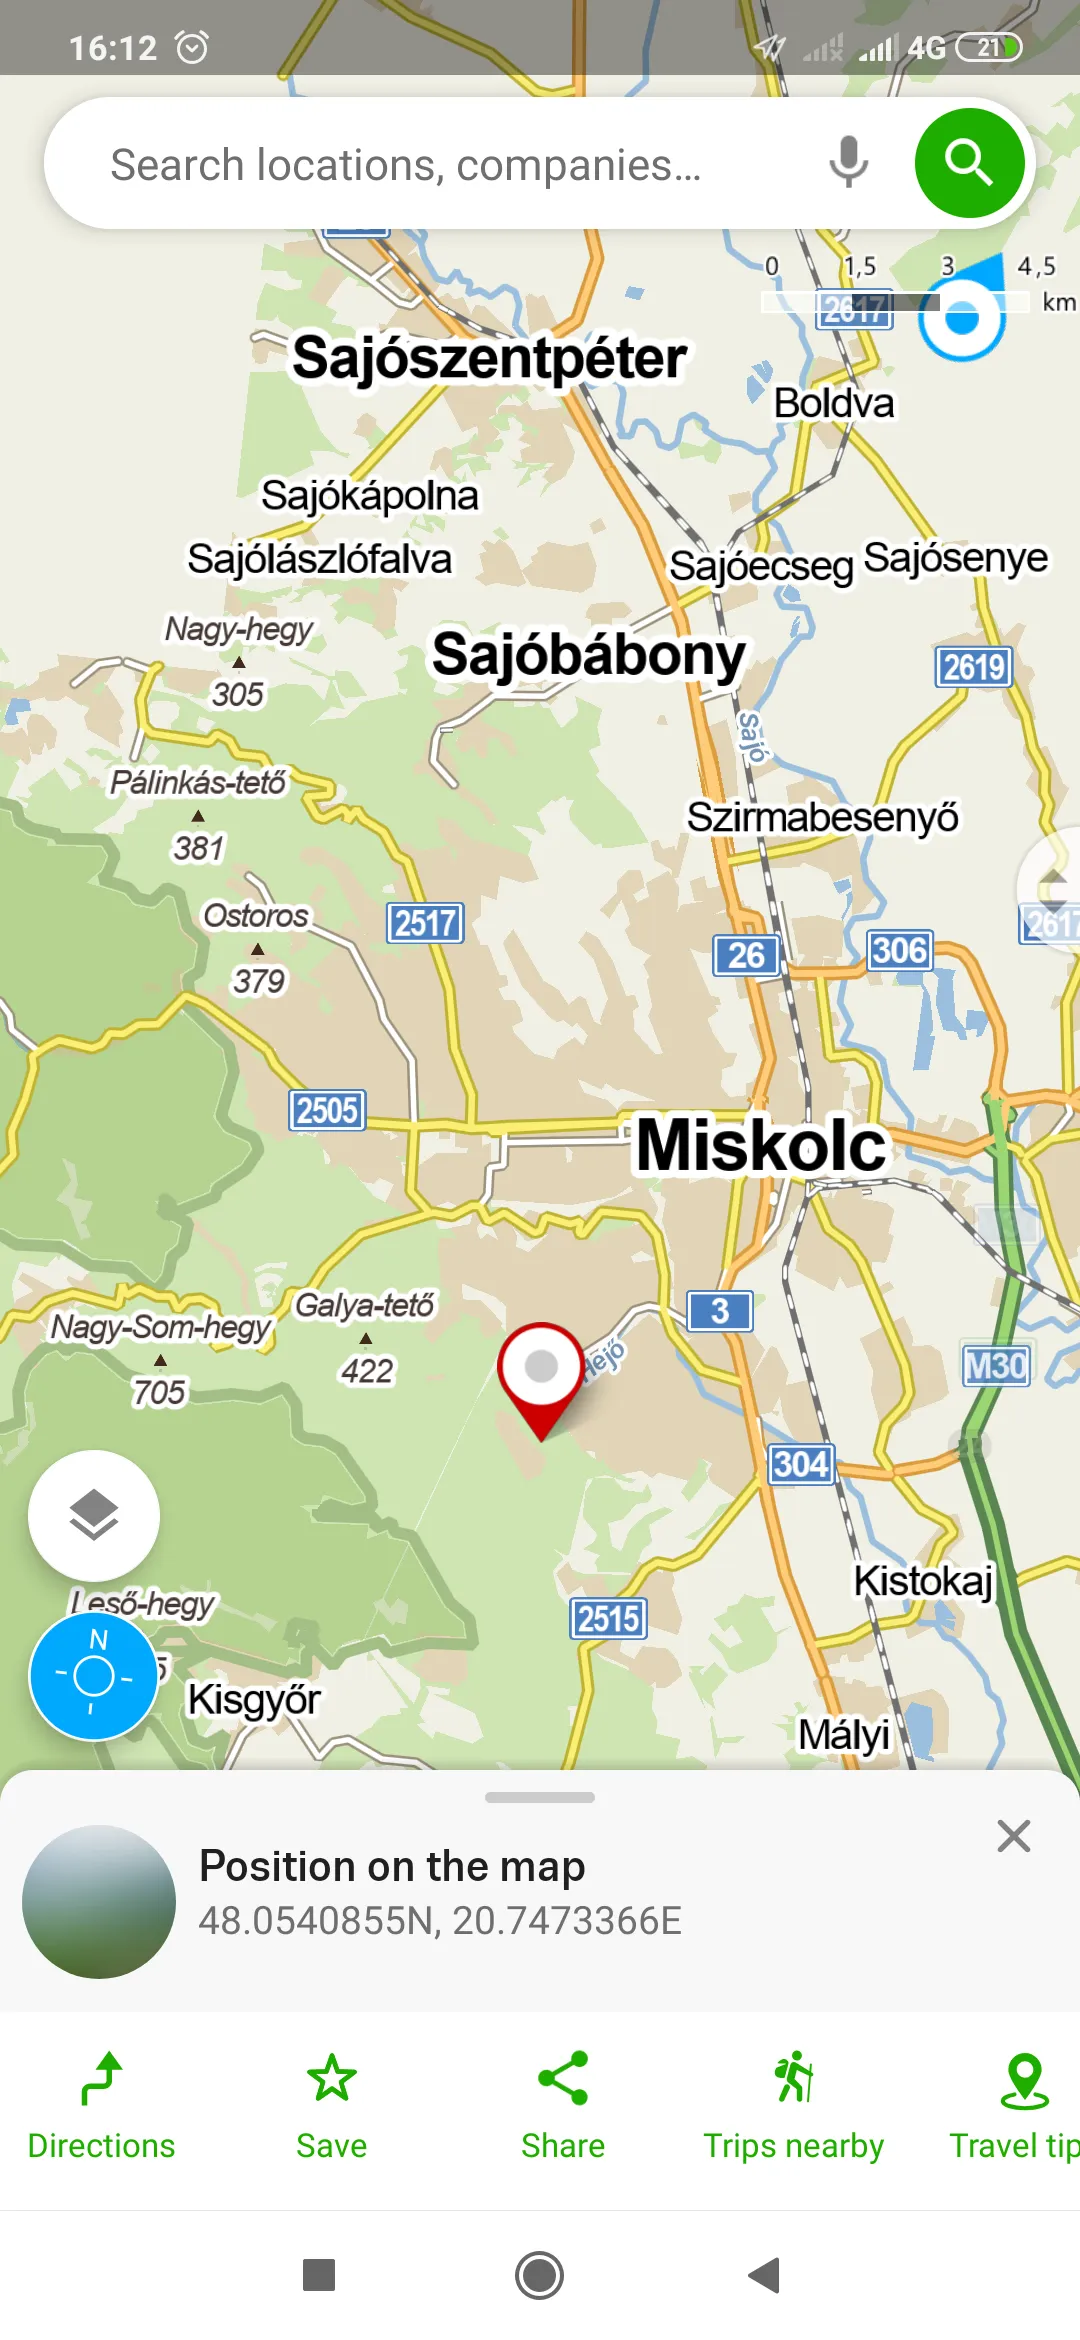 Mapy.cz location information in mobile version